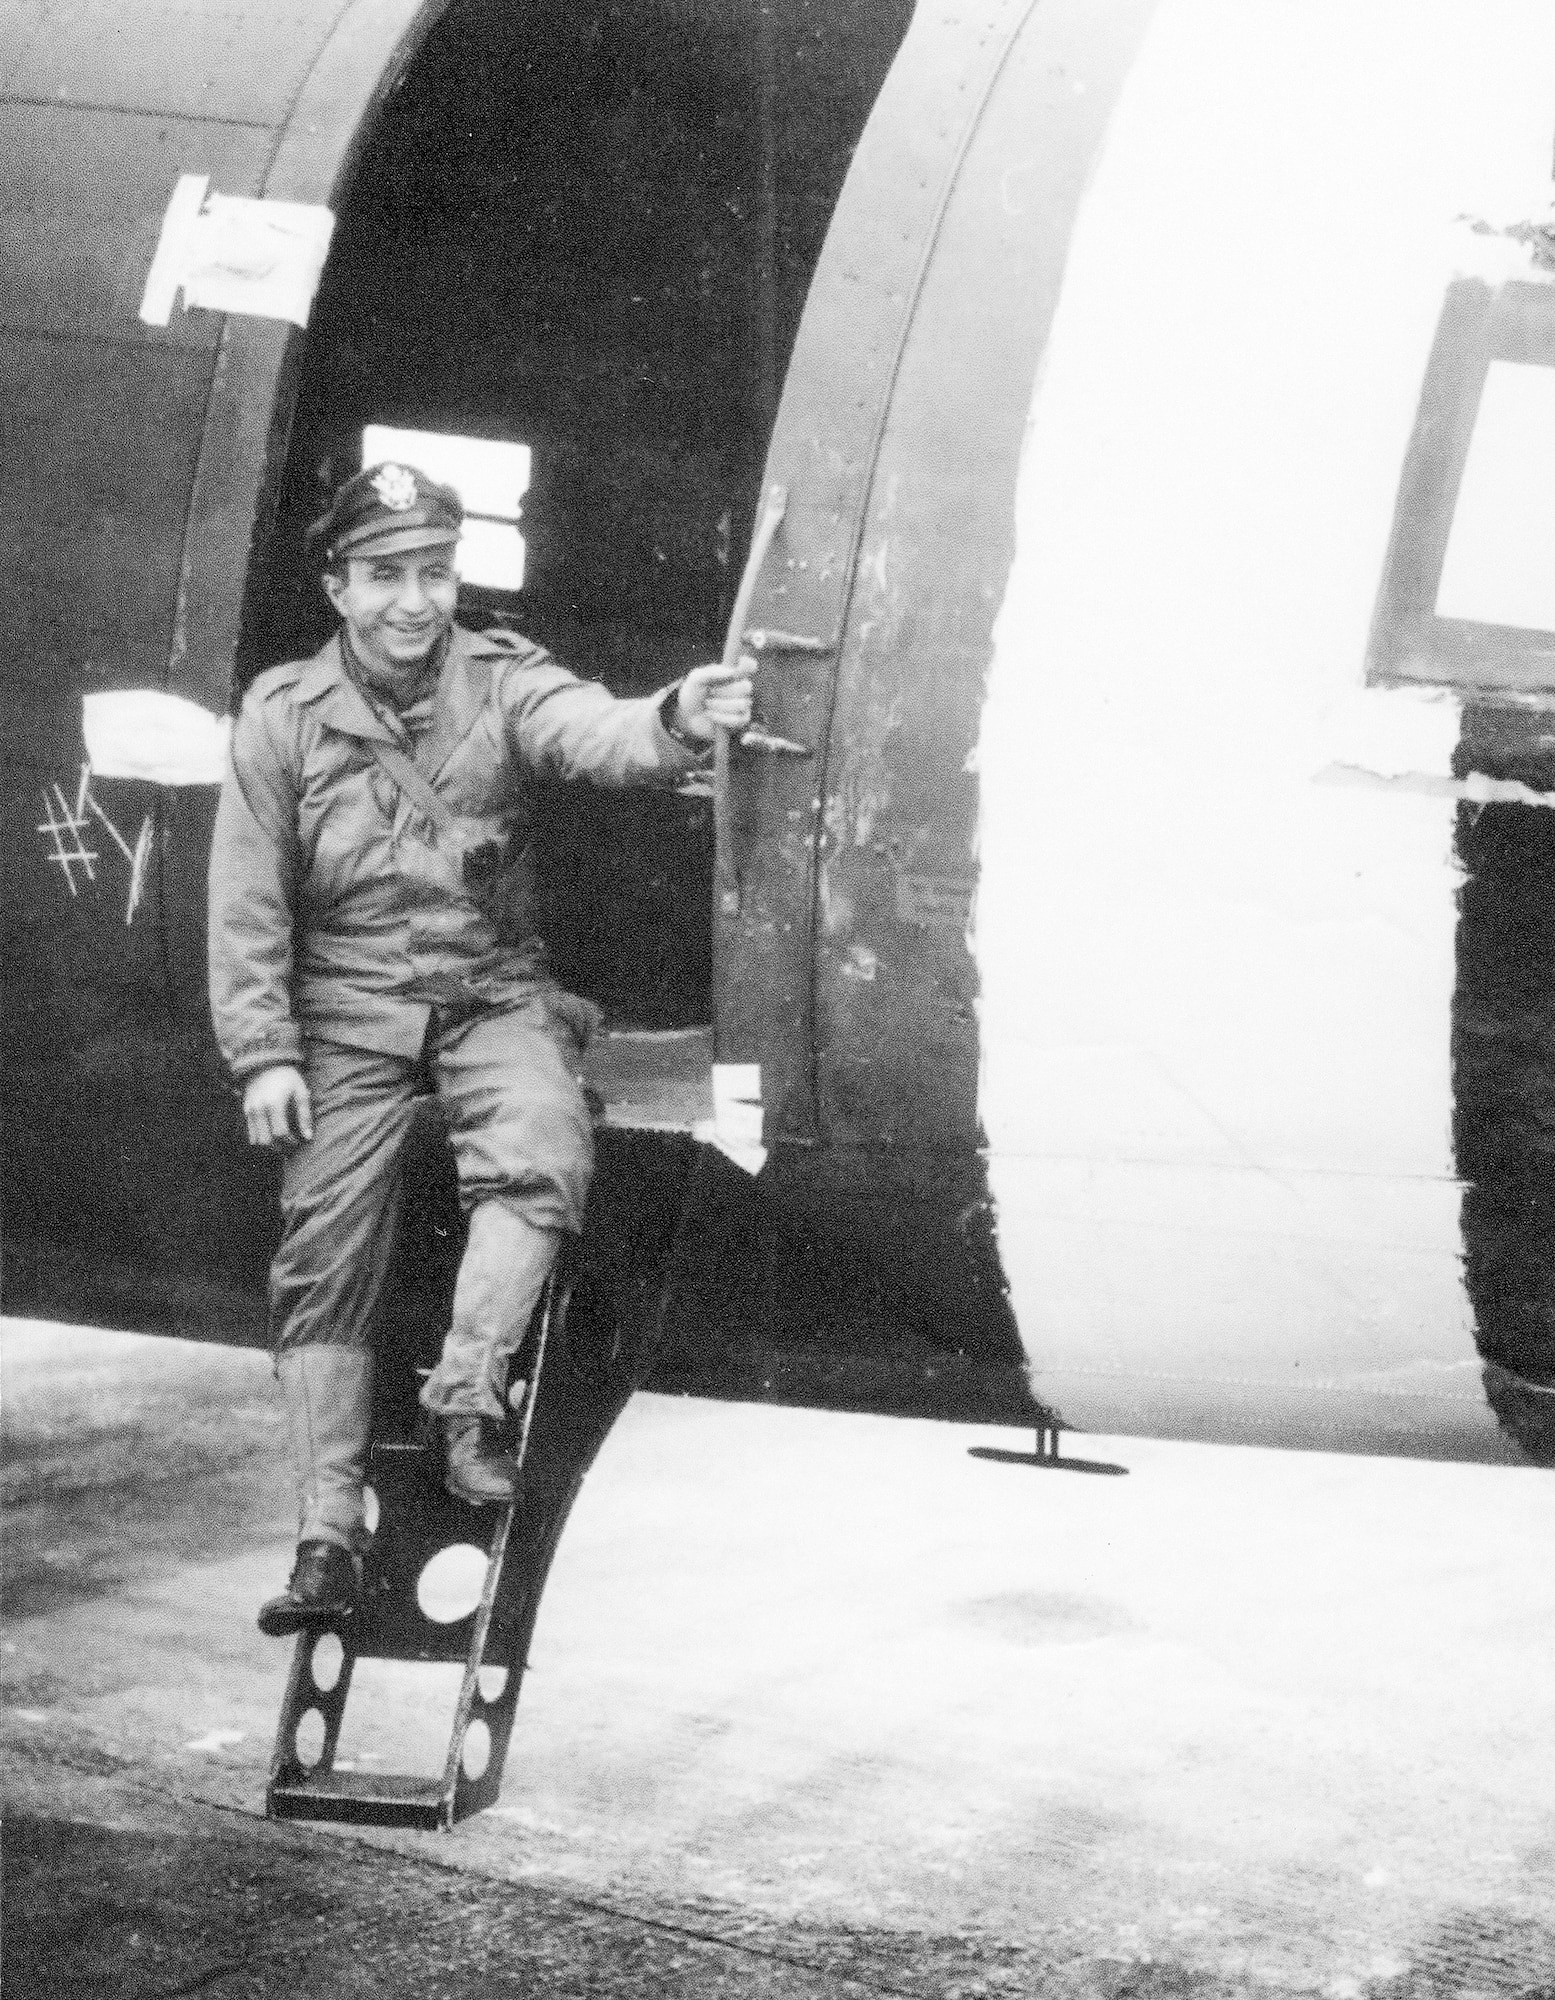 305th Troop Carrier Squadron navigator, Bill Silberkleit, pauses for a photograph after returning from a "D-Day plus 1" mission to Normandy, France. The 305th TCS was one of four flying squadrons assigned to the 442nd Troop Carrier Group whose D-Day mission was to drop paratroopers of the 82nd Airborne near St. Mere Eglise. Mister Silberkleit was the navigator aboard the Group's lead aircraft that day. The 442nd TCG was the World War II predecessor of the 442nd Fighter Wing, an Air Force Reserve Command A-10 Thunderbolt II unit based at Whiteman Air Force Base, Mo. (Photo courtesy of the Herky Barbour estate)